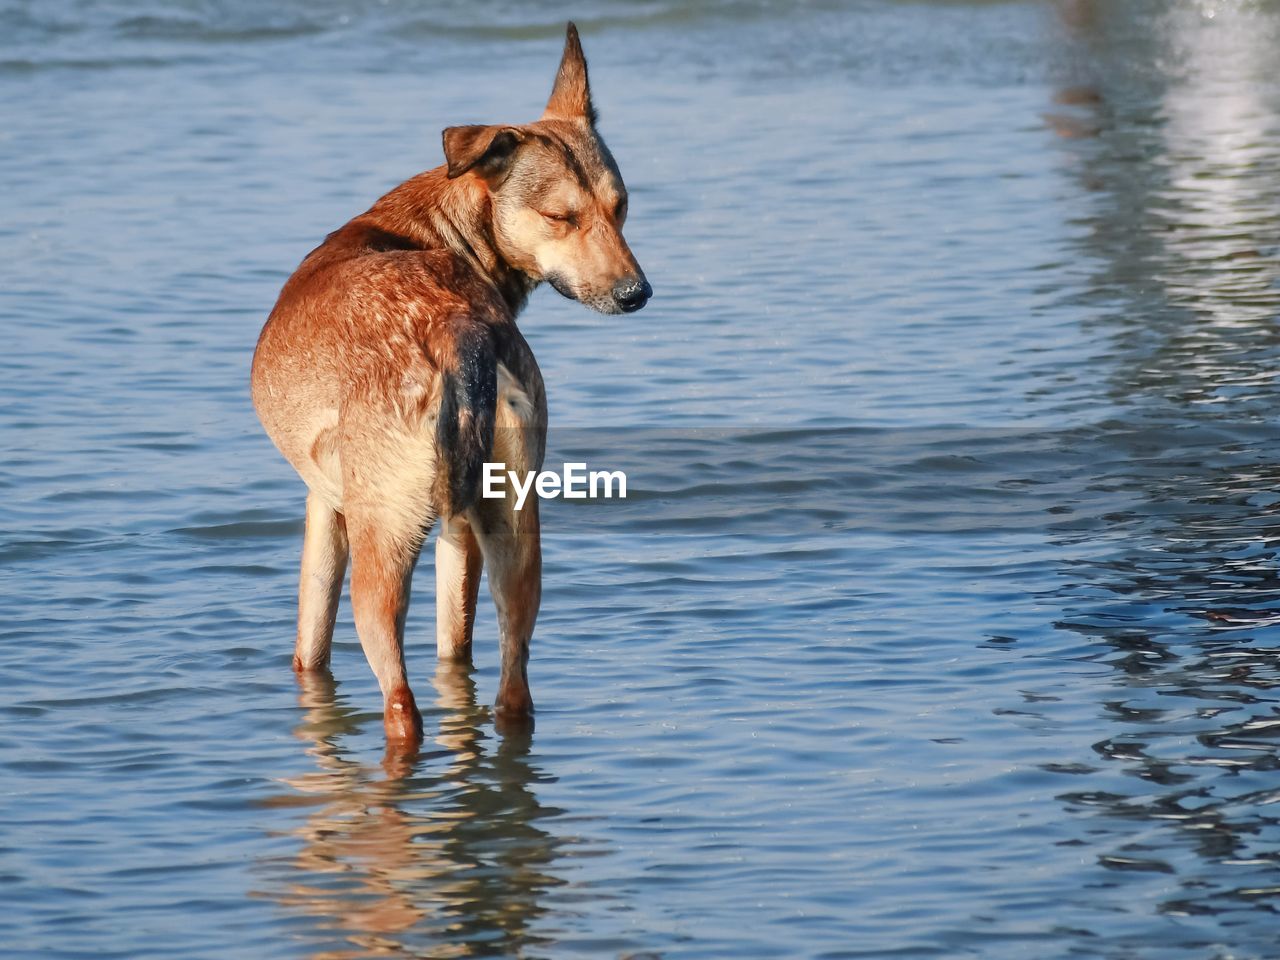 DOG STANDING IN WATER